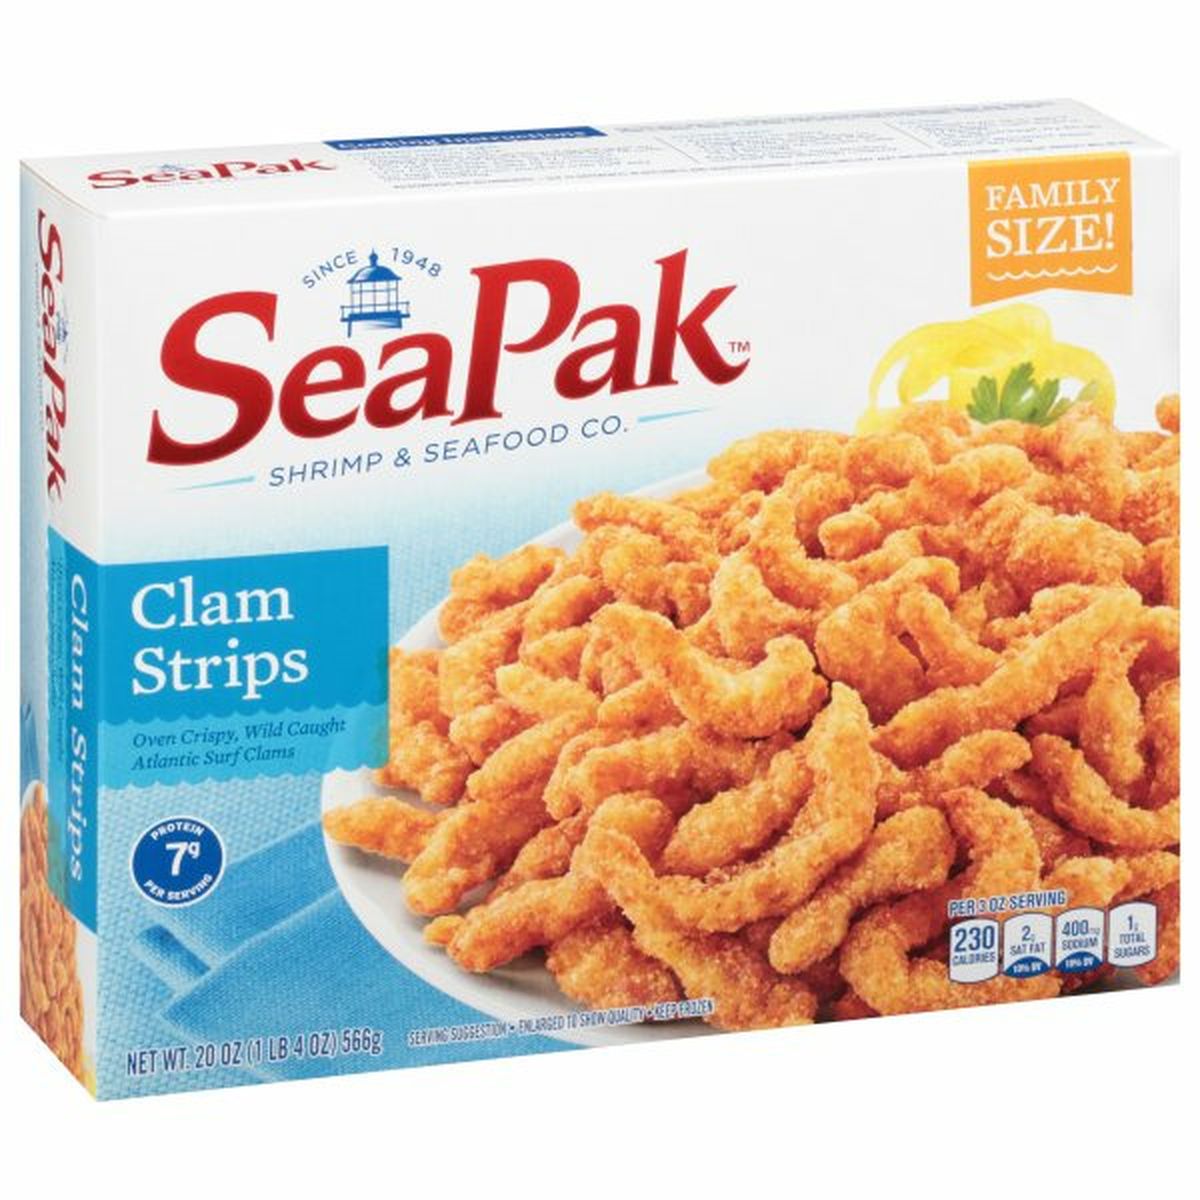 Calories in SeaPak Clam Strips, Family Size